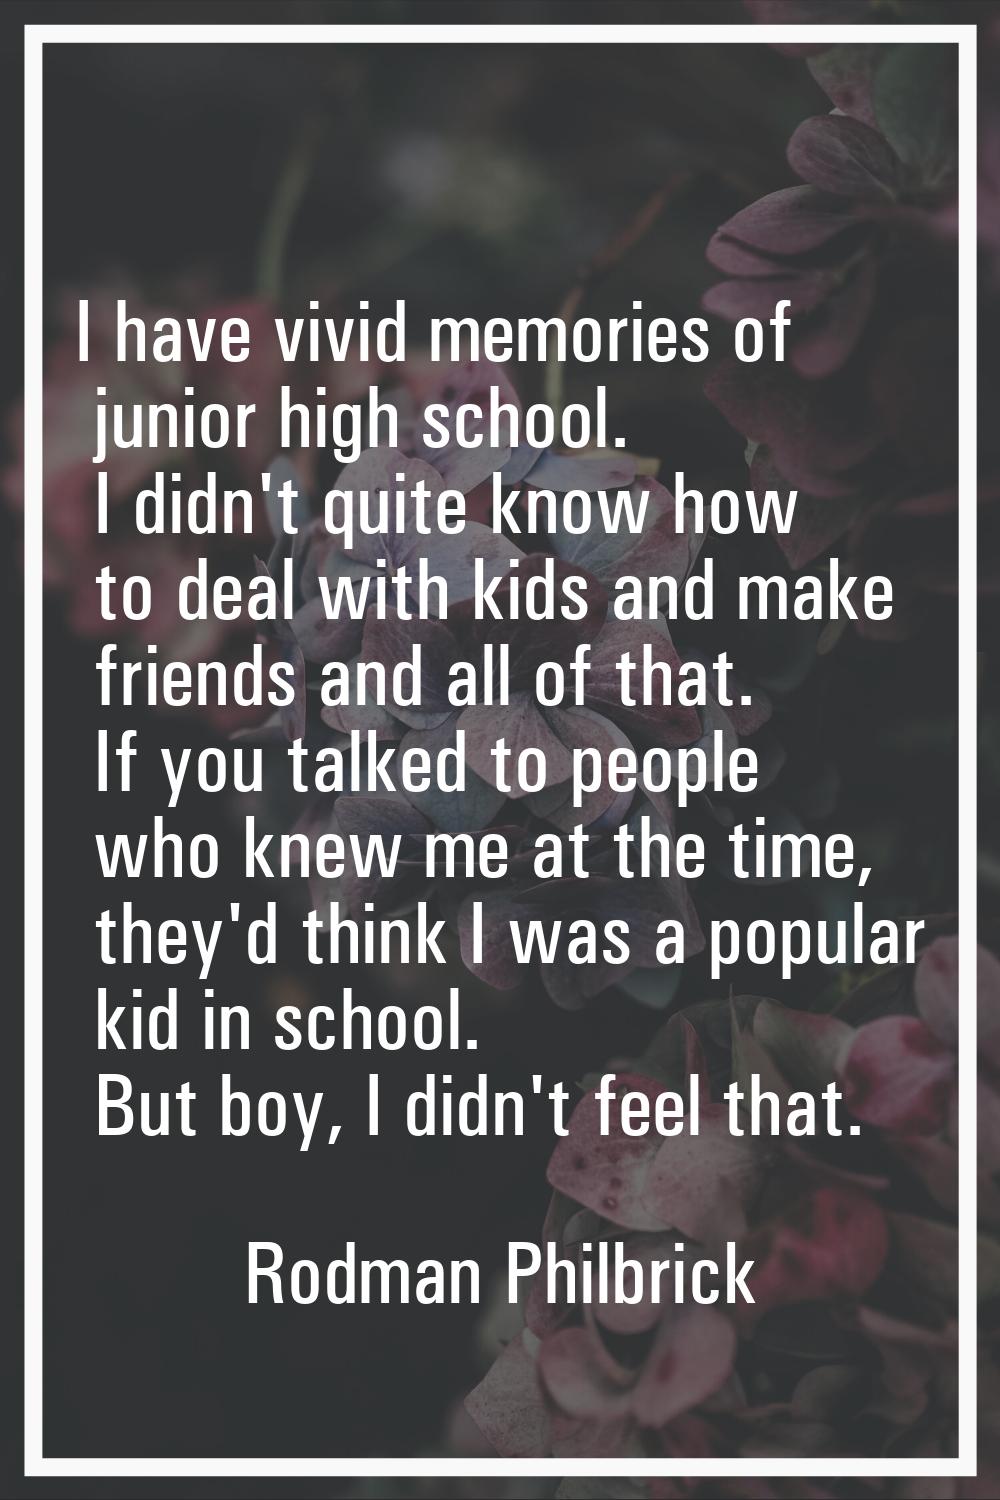 I have vivid memories of junior high school. I didn't quite know how to deal with kids and make fri